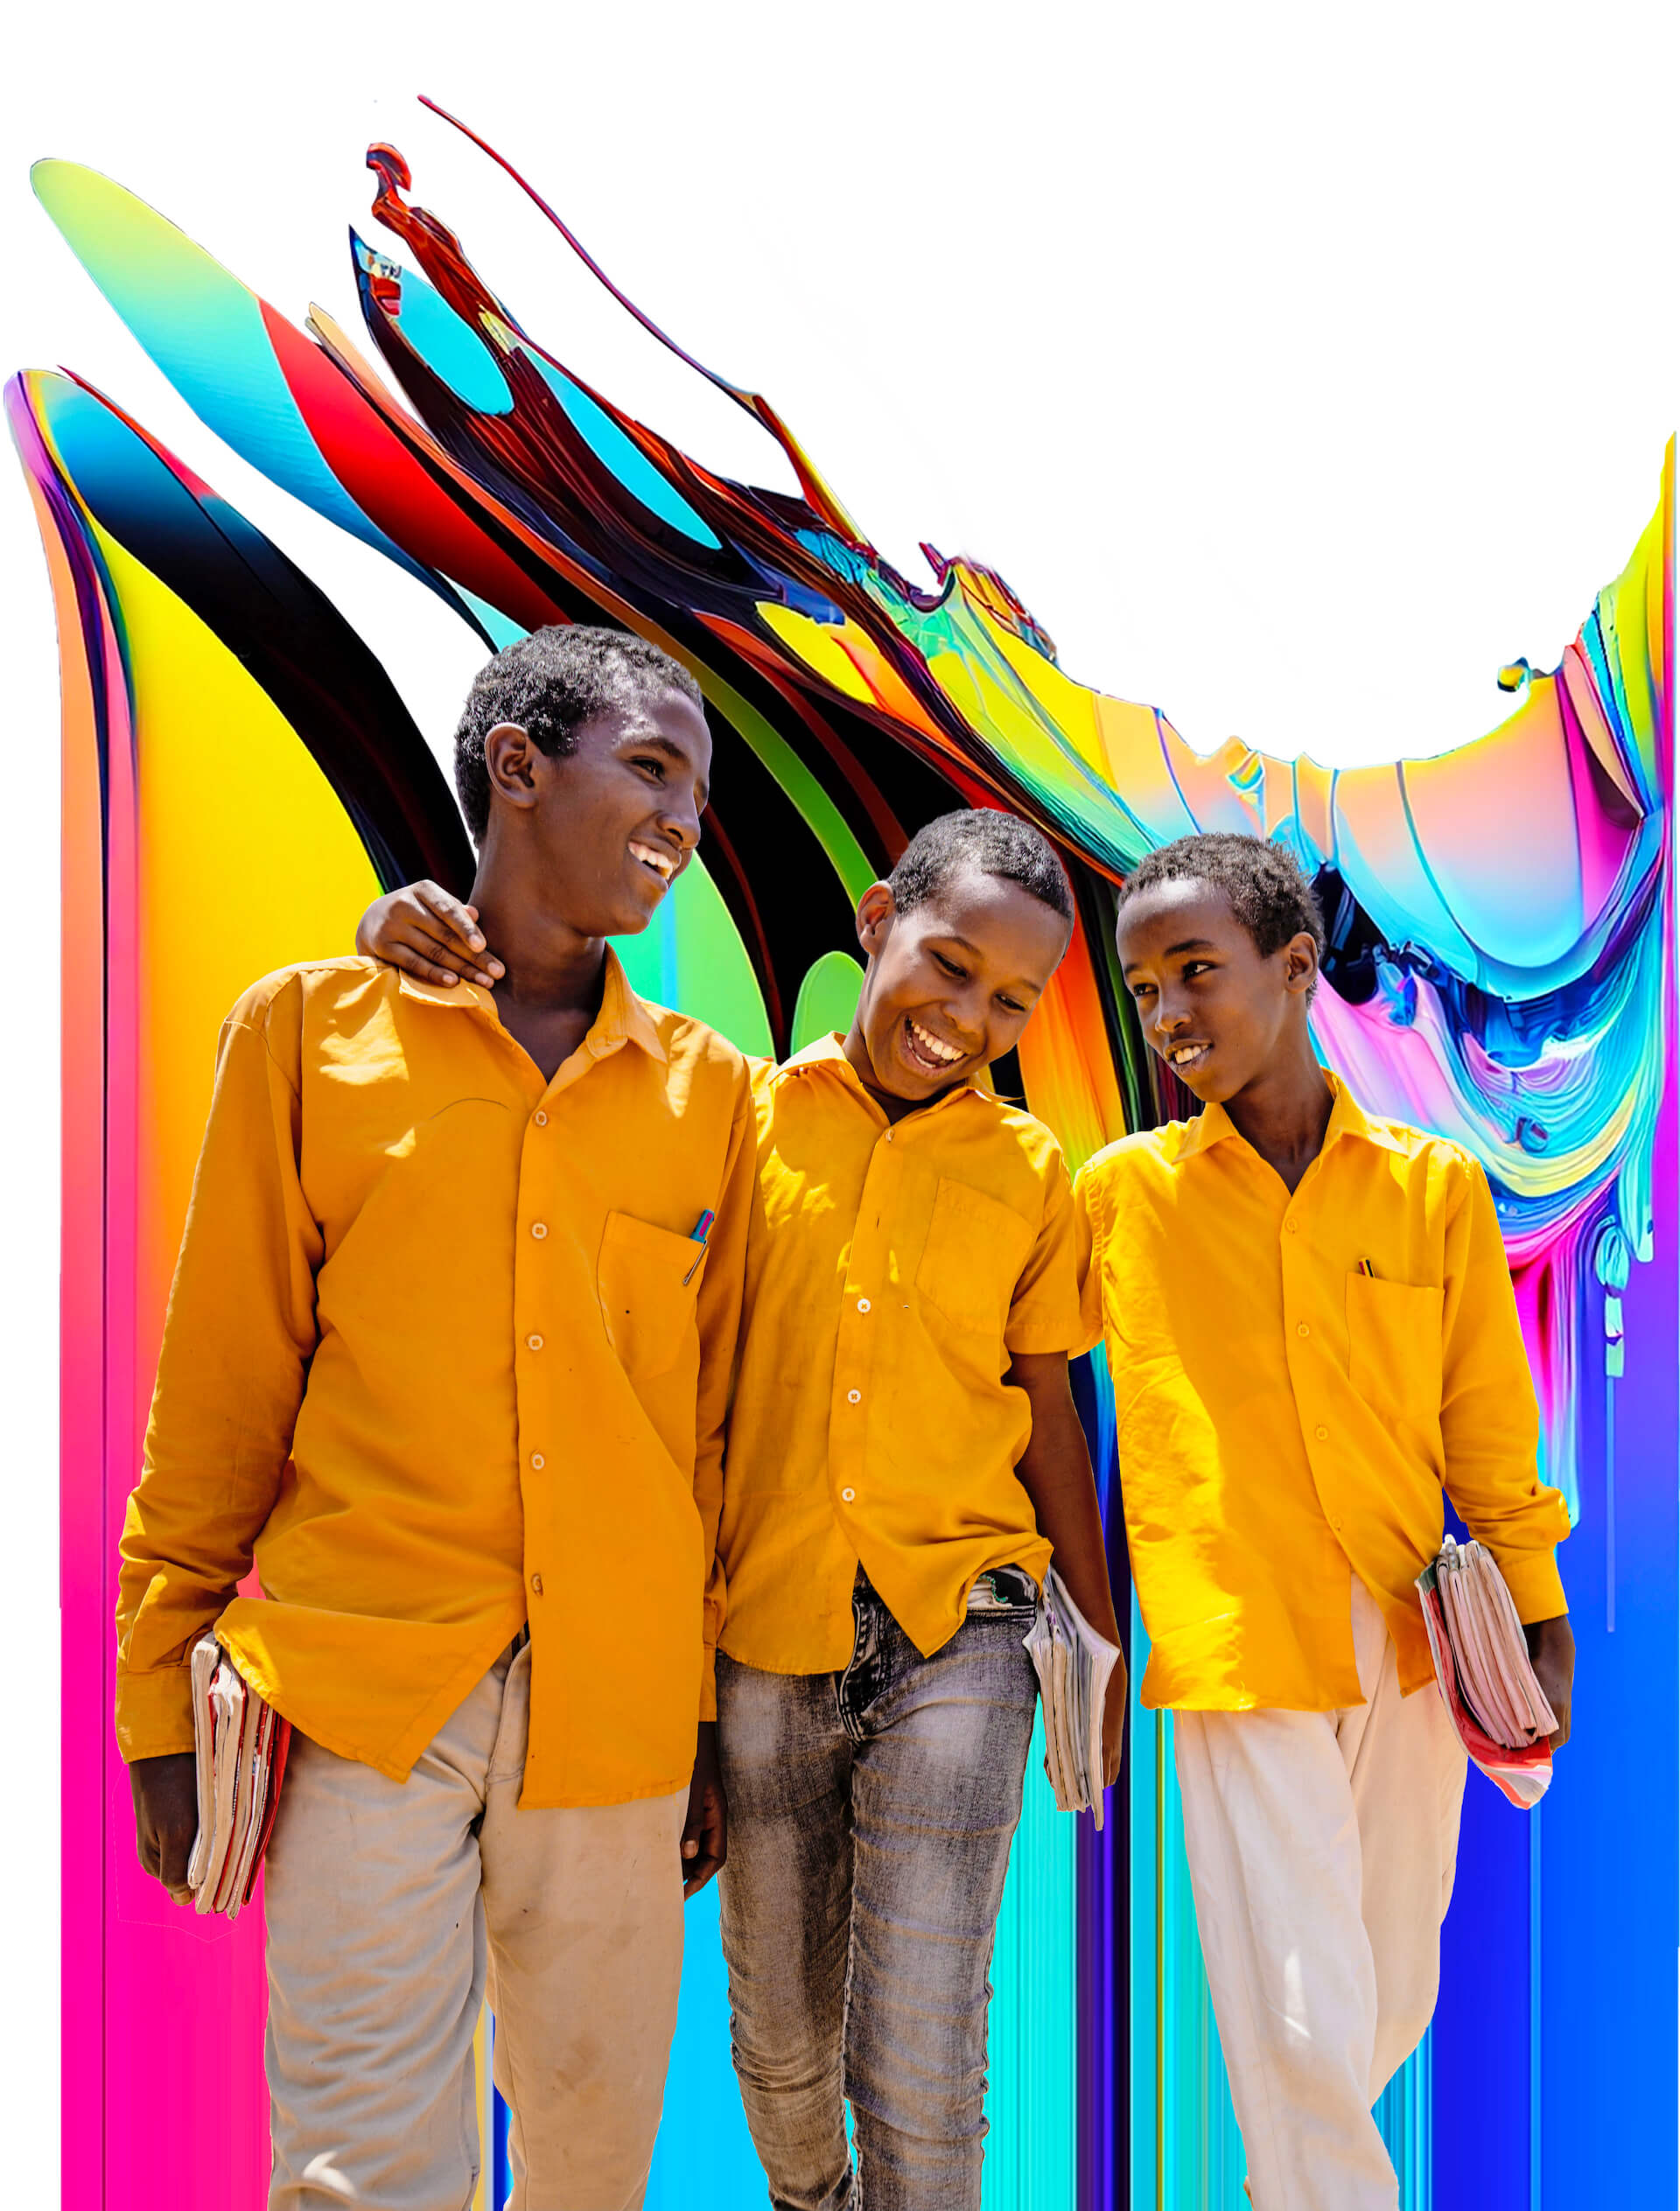 Three Somalian boys smiling against a colorful background